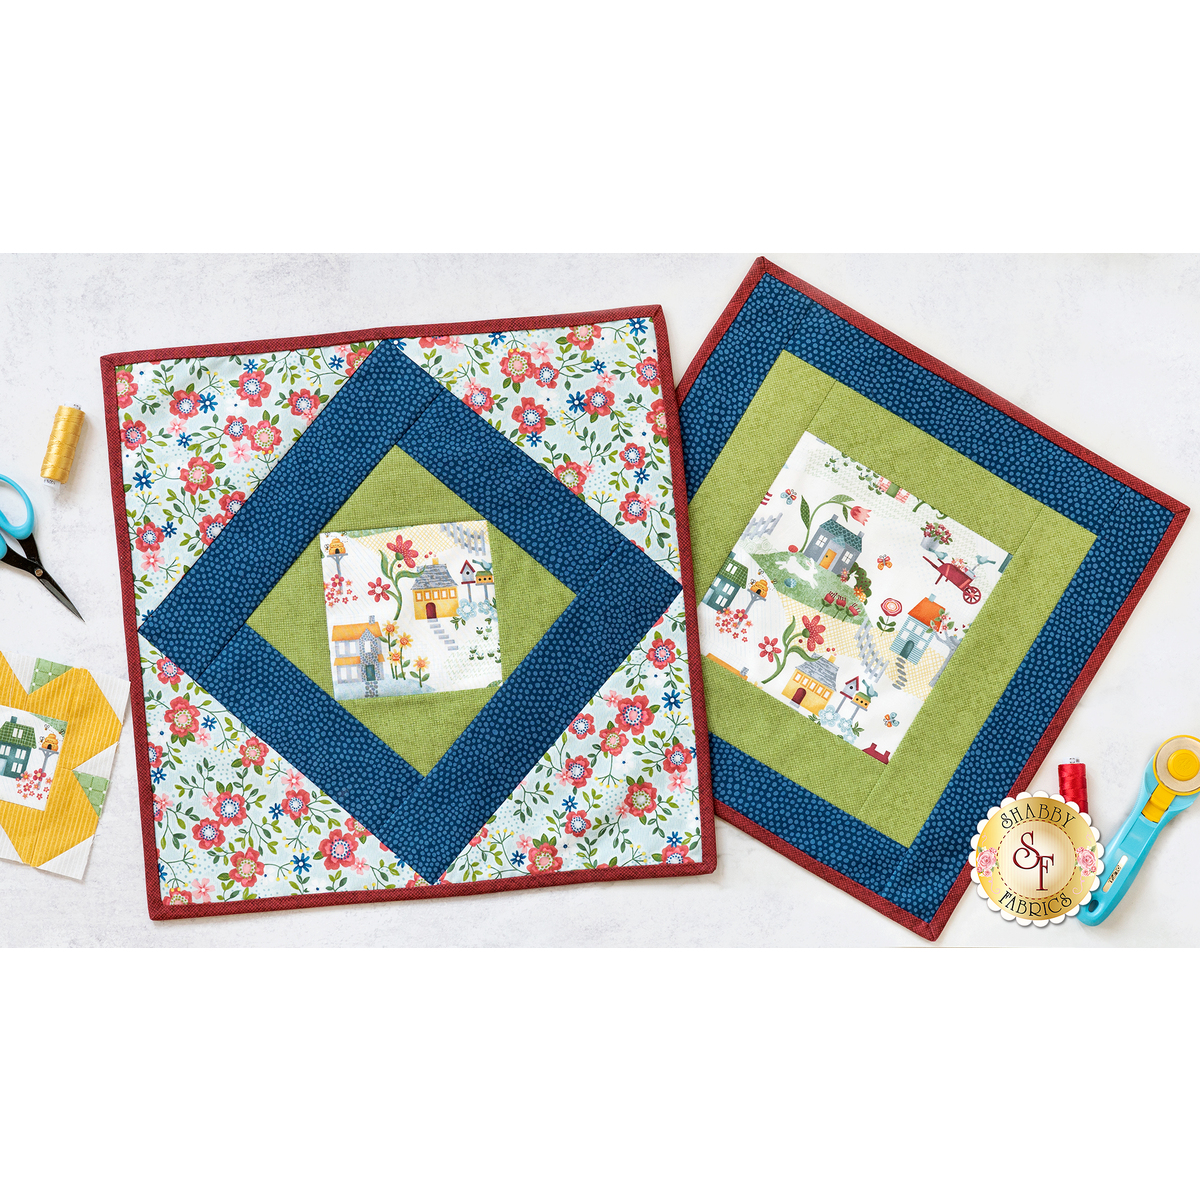 How to Make an Easy Quilt As You Go Project Bag! Zippity-Do-Done